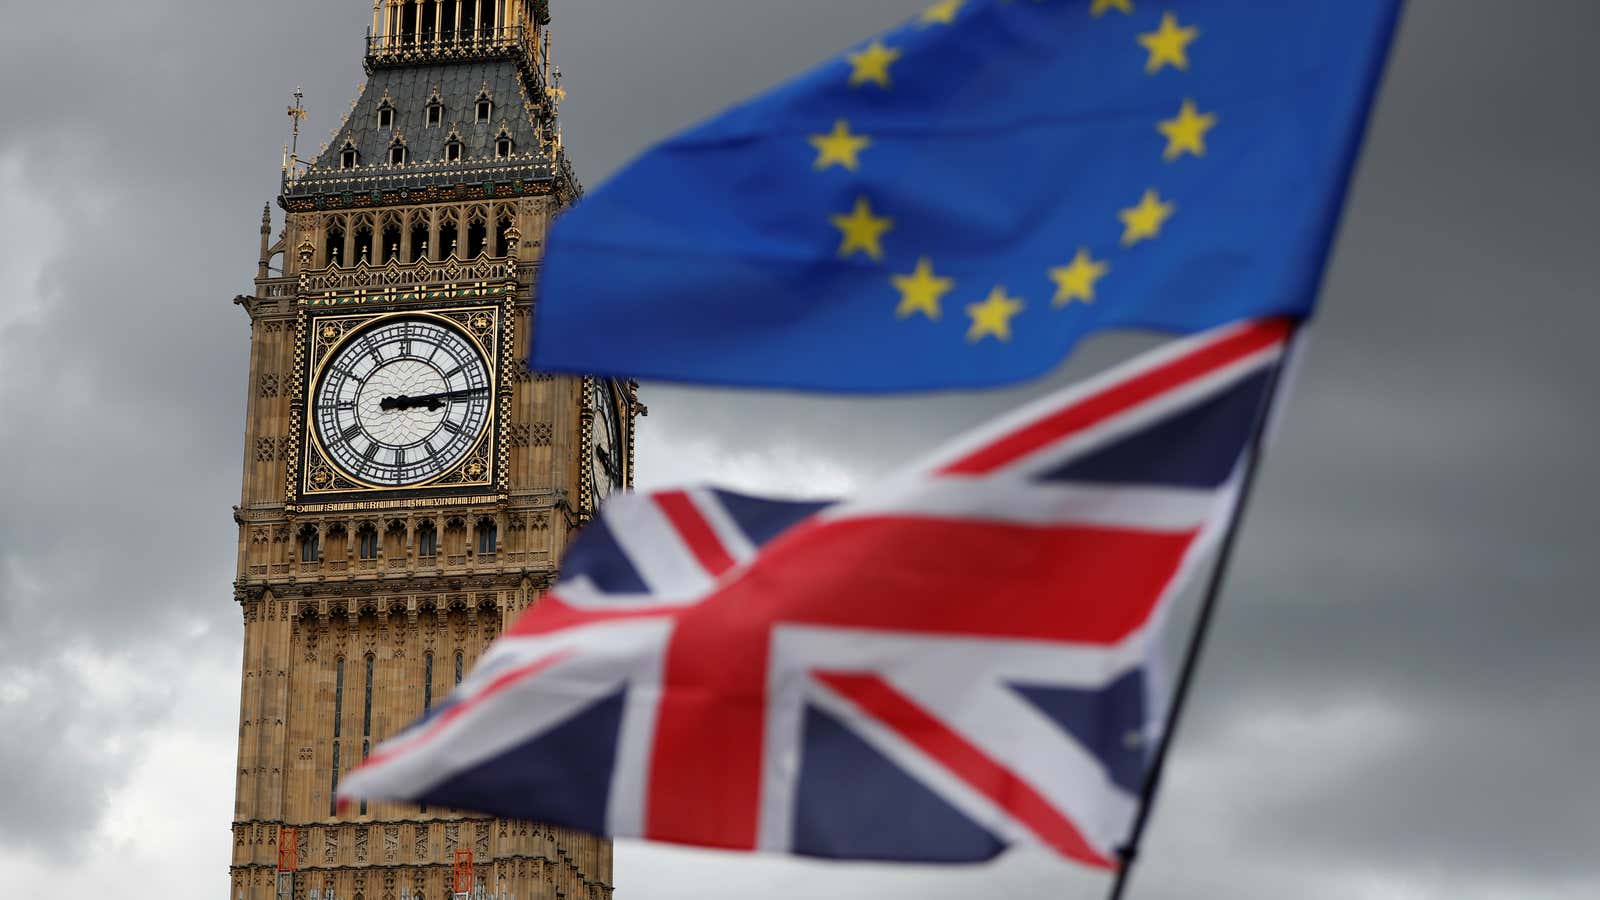 The exact time the UK will leave the EU is set